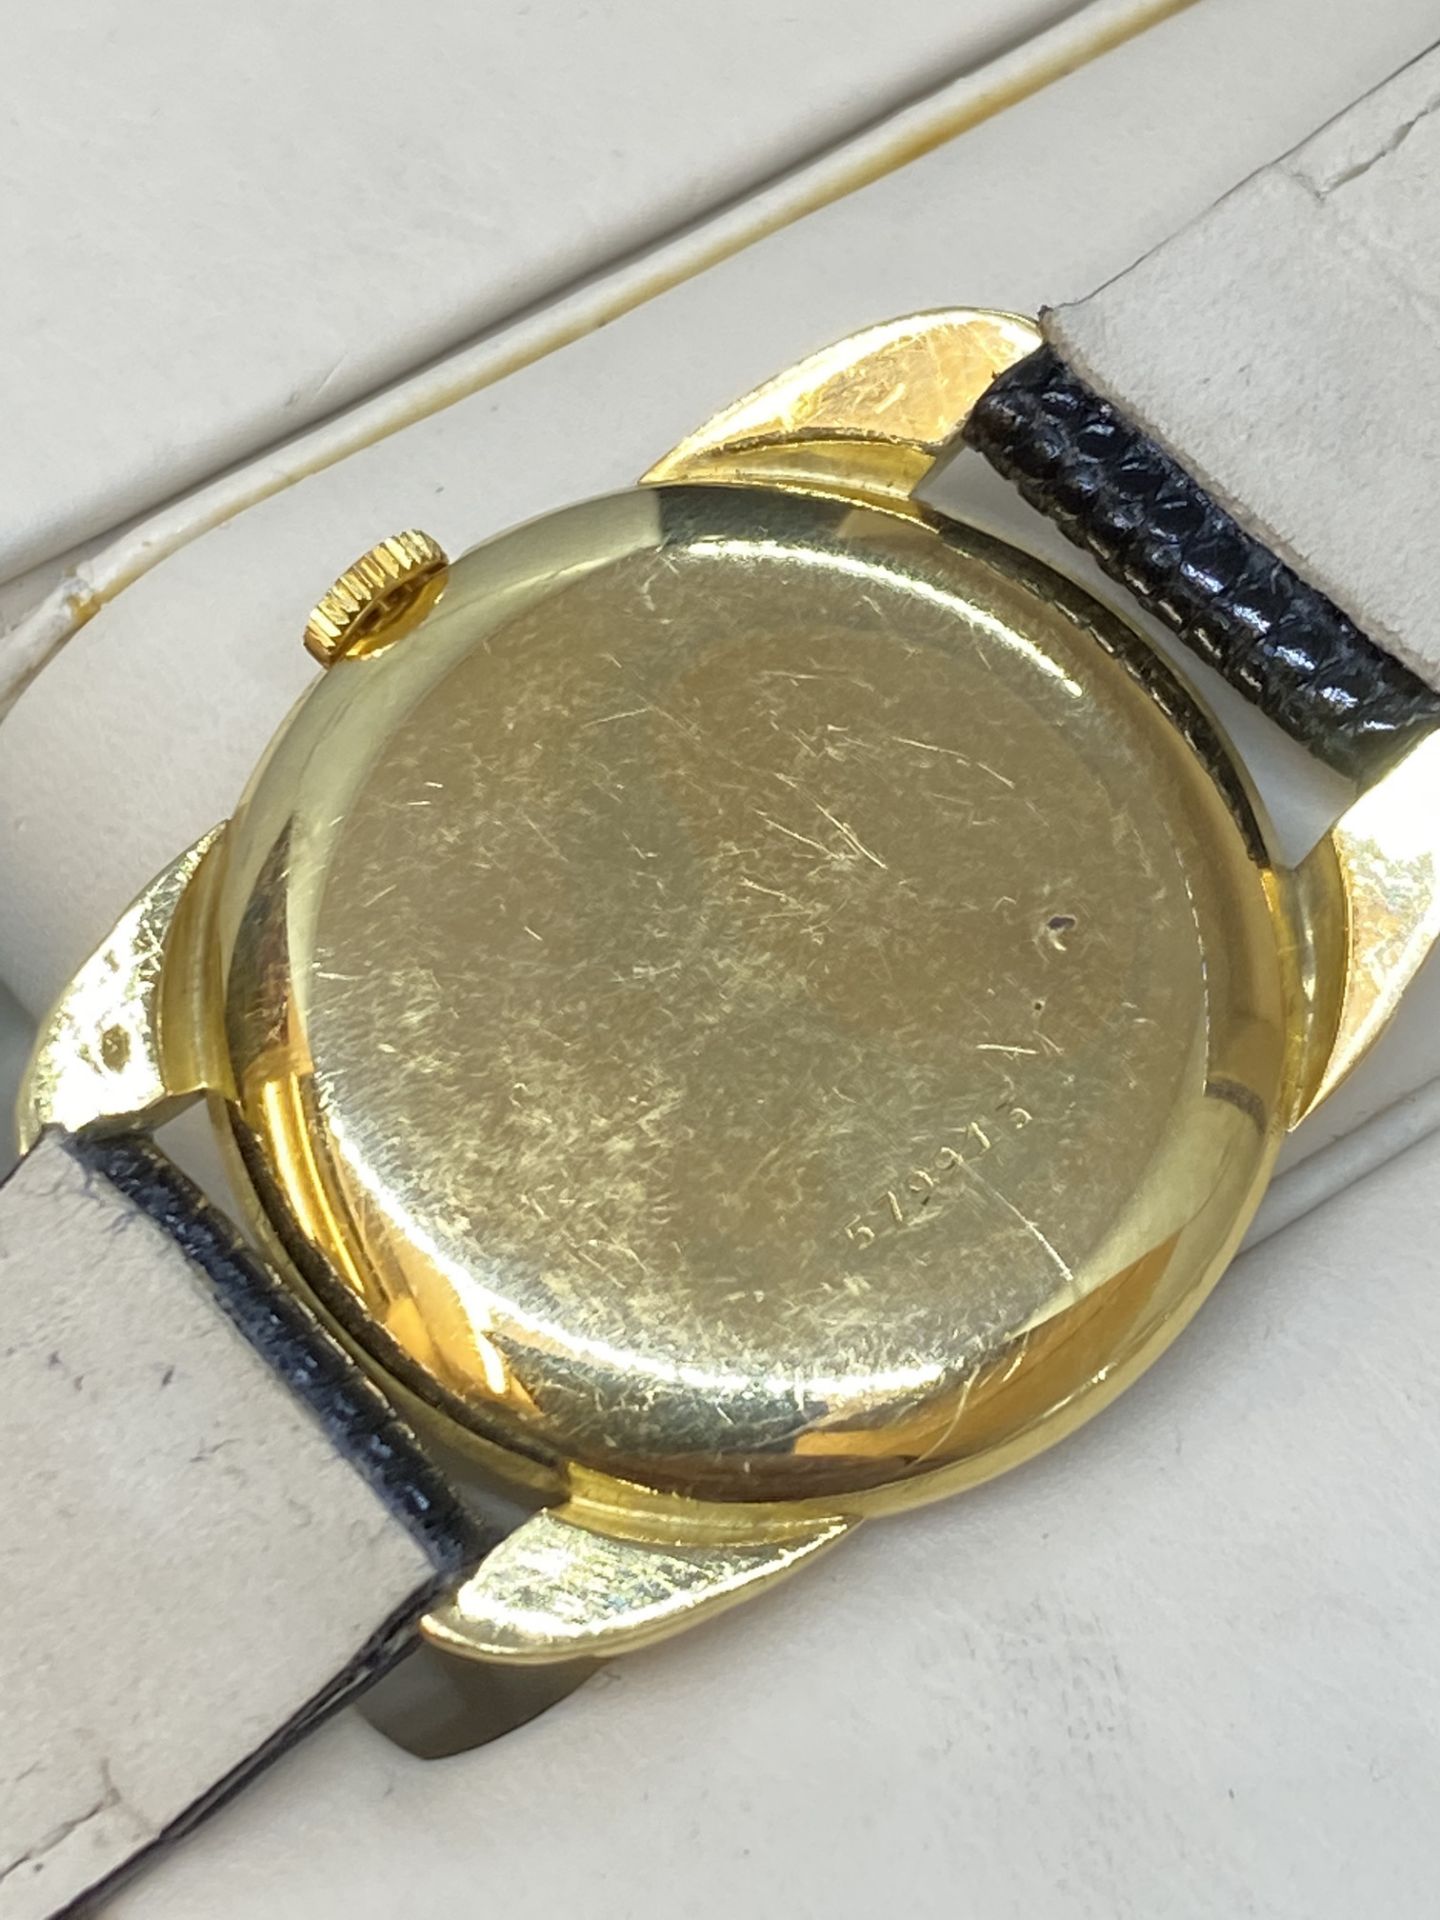 18ct GOLD WATCH MARKED TIFFANY & CO WITH FAB SUISSE MOVEMENT - Image 6 of 12